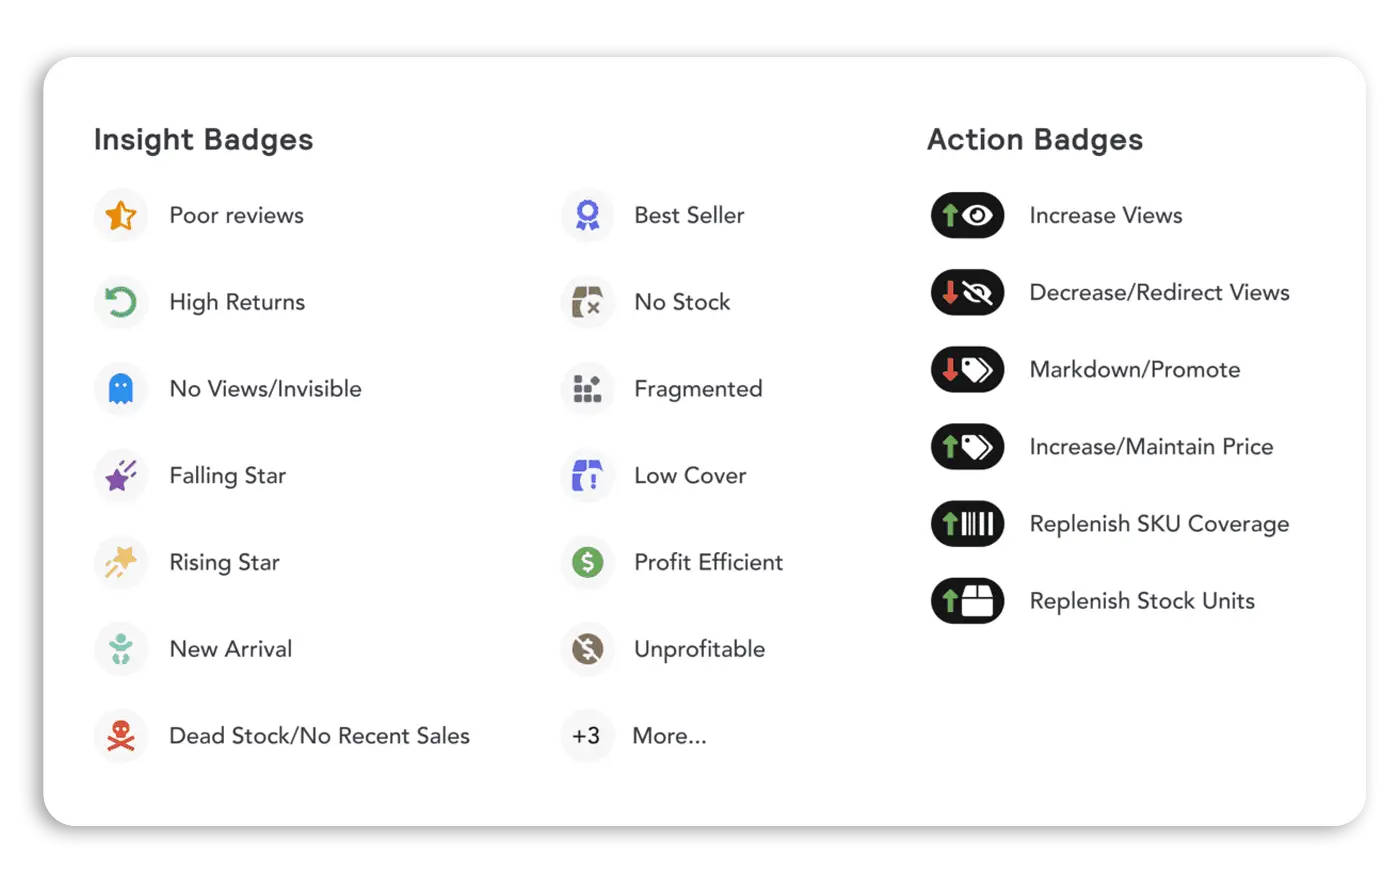 Insight and action badges from EDITED Overlay